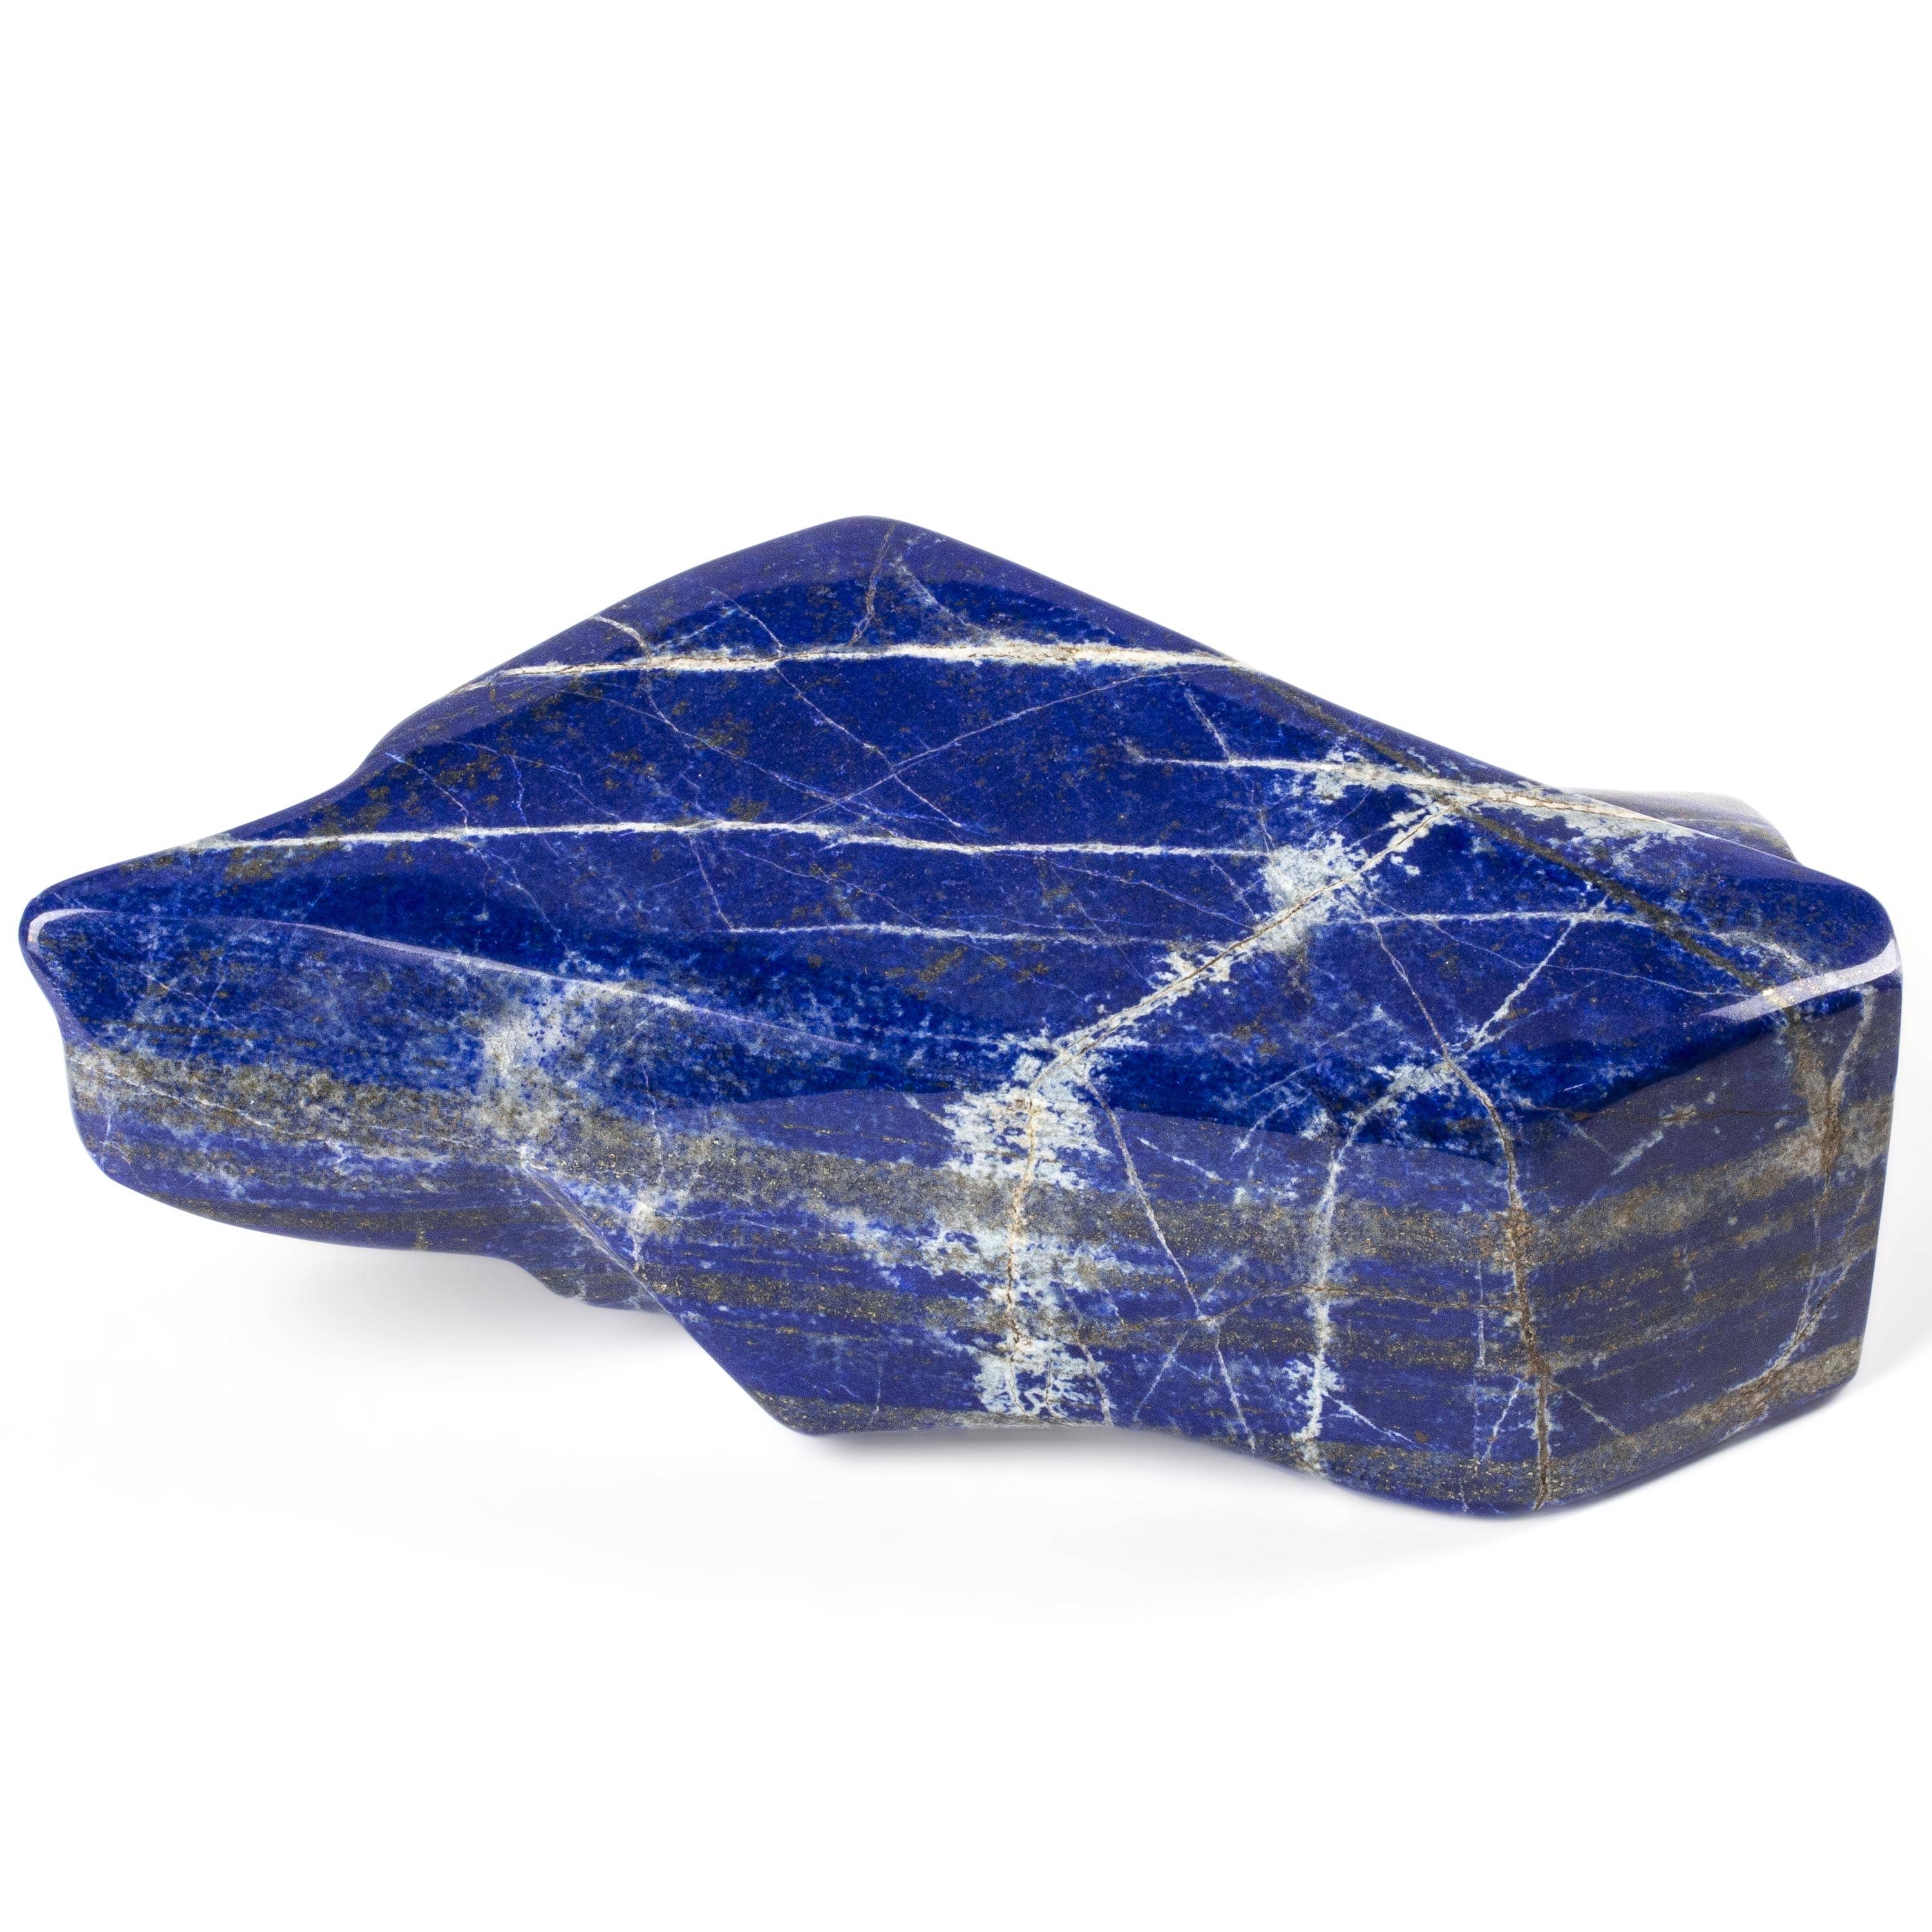 Kalifano Lapis Lapis Lazuil Freeform from Afghanistan - 2.9 kg / 6.4 lbs LP3100.001